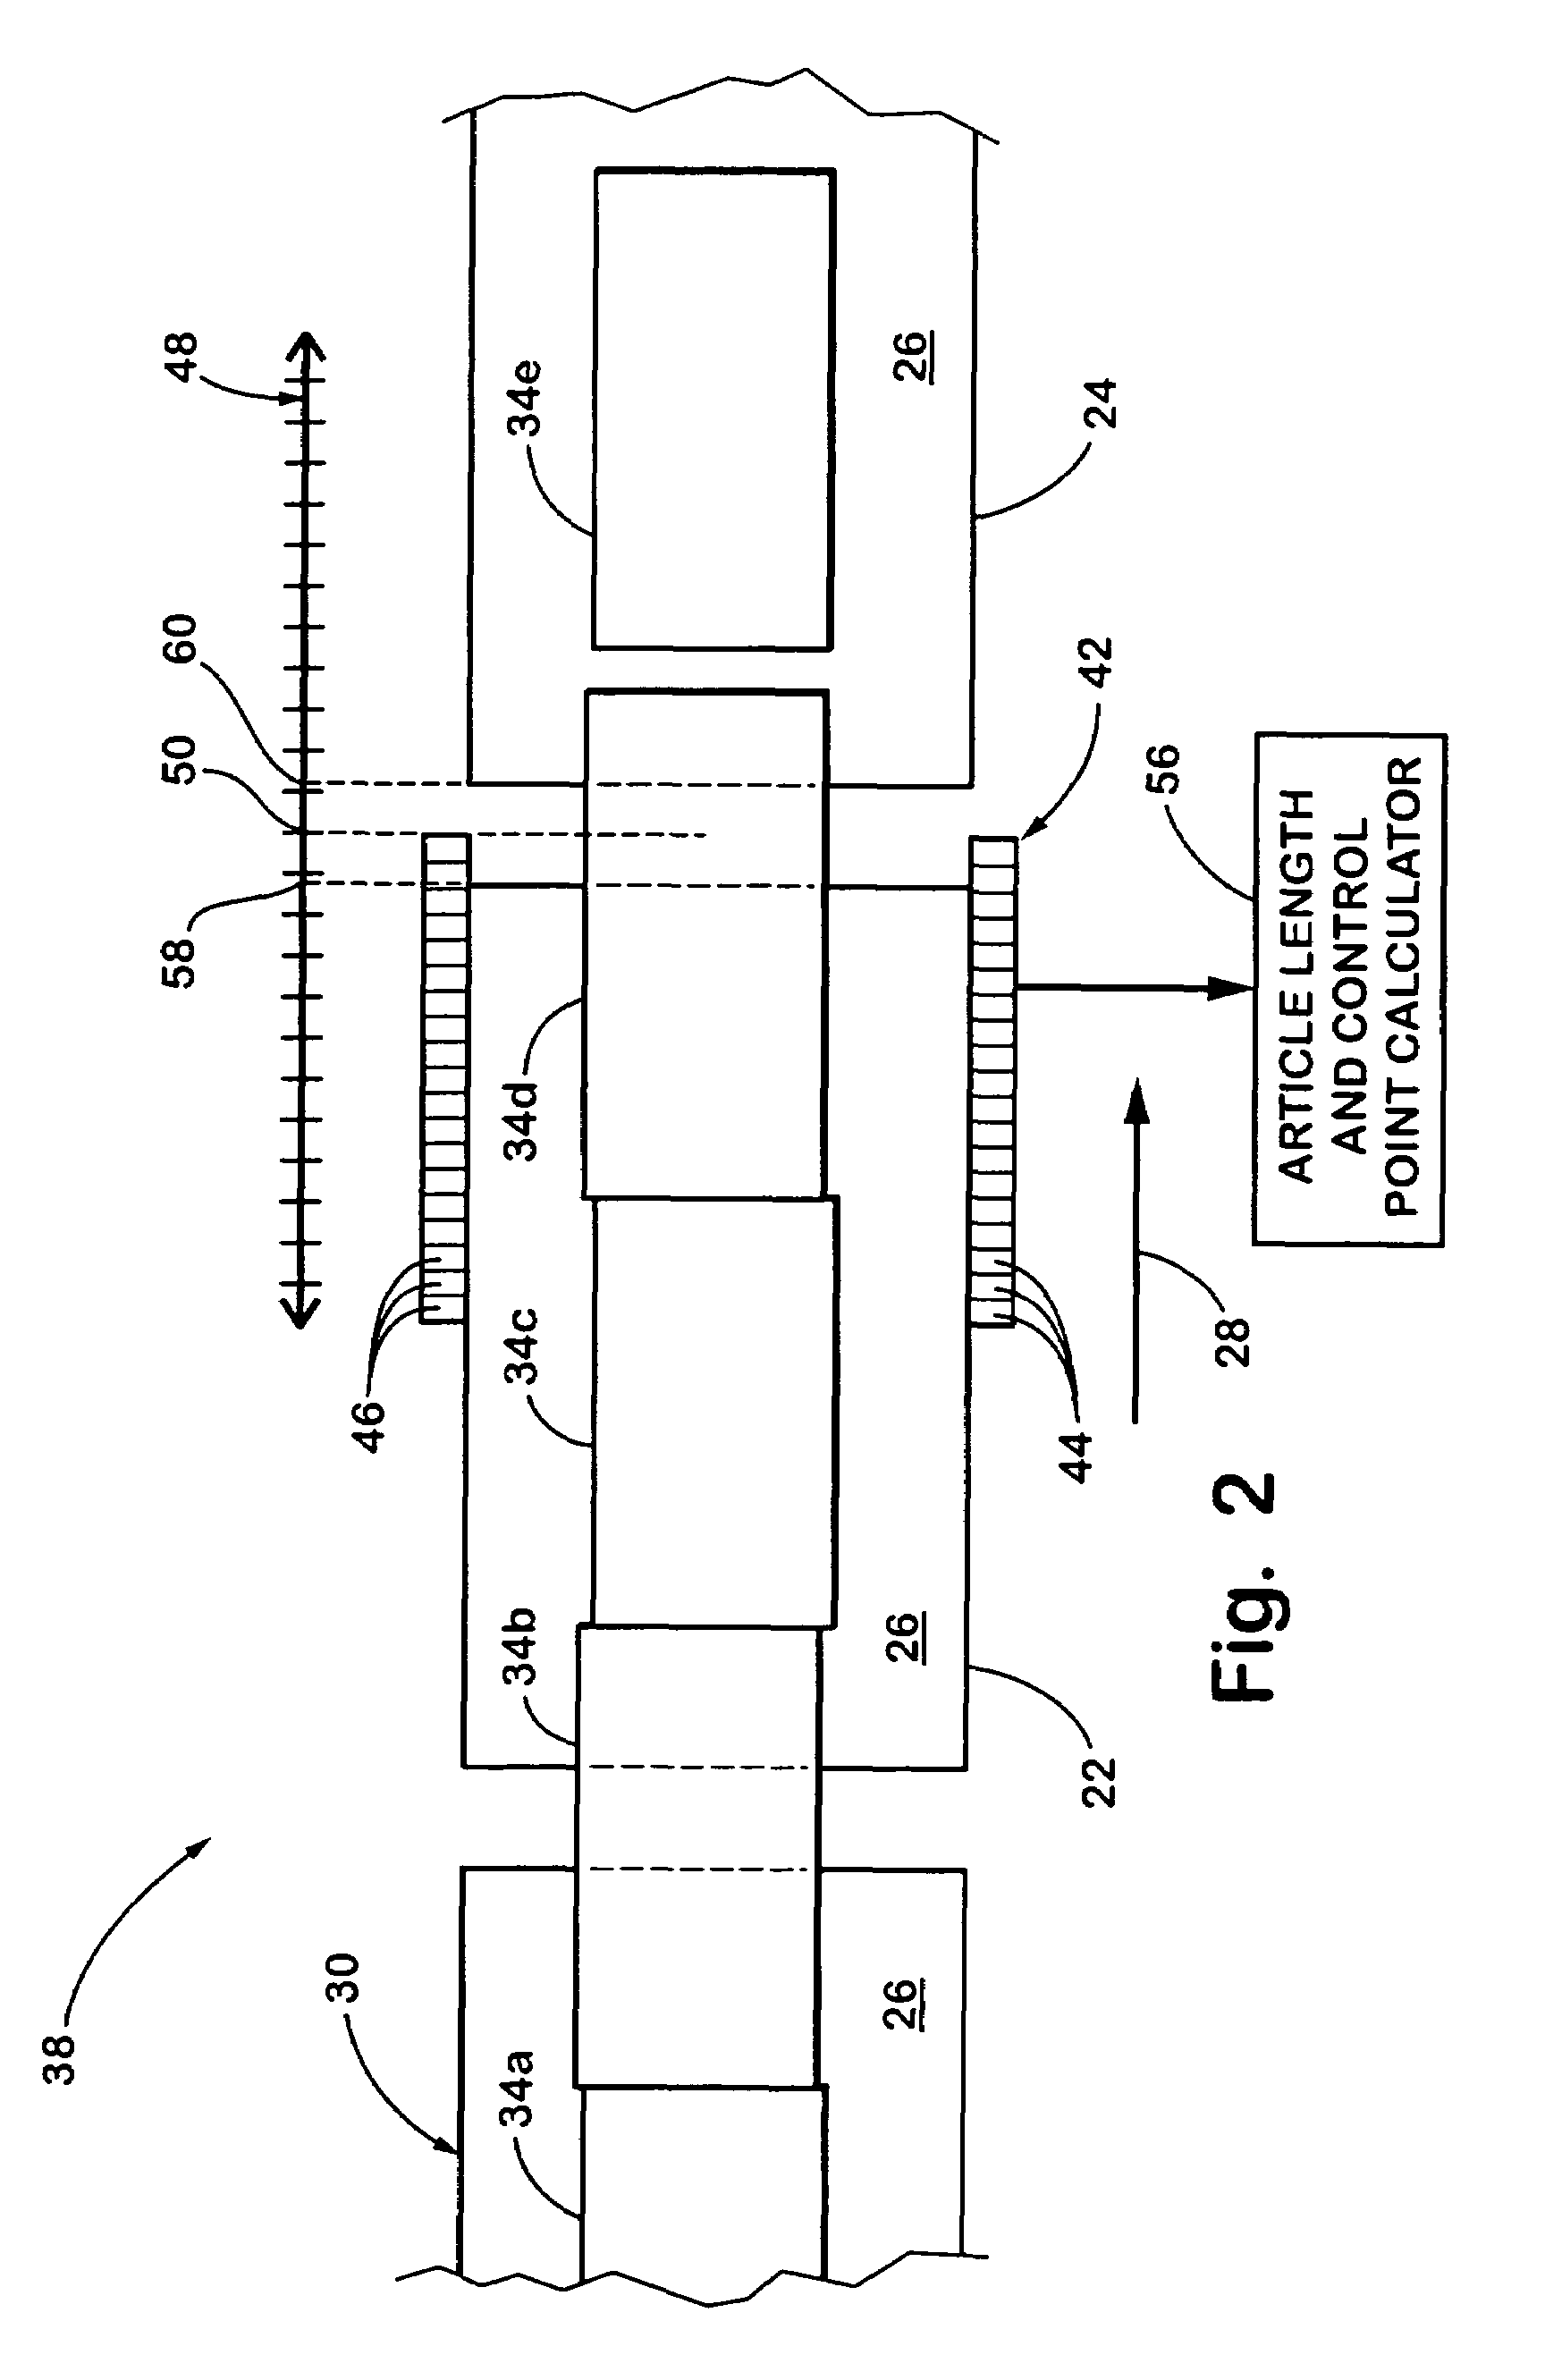 Conveyor induct system